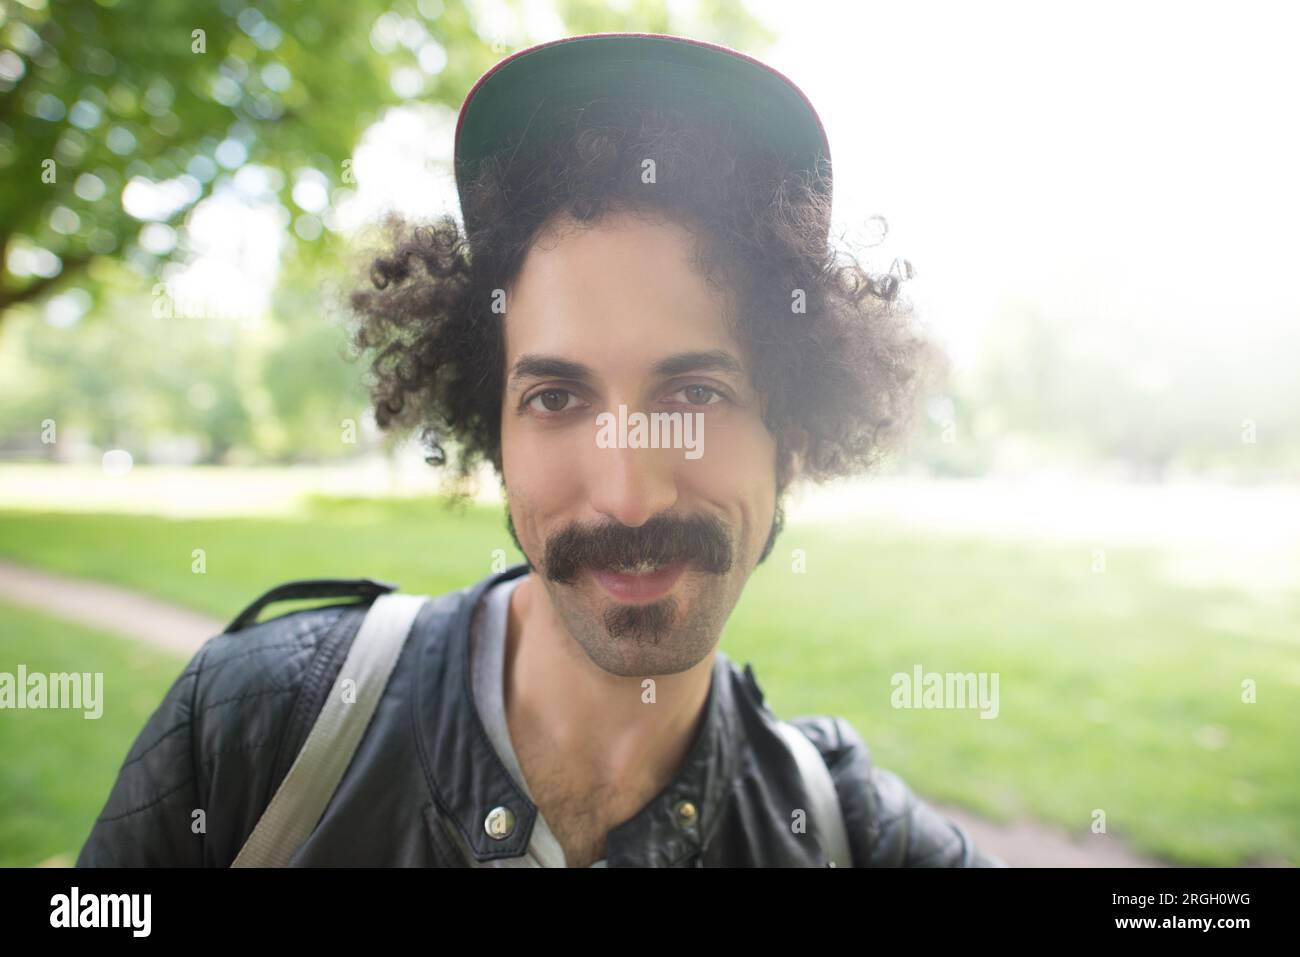 Young man with moustache and baseball cap in park Stock Photo